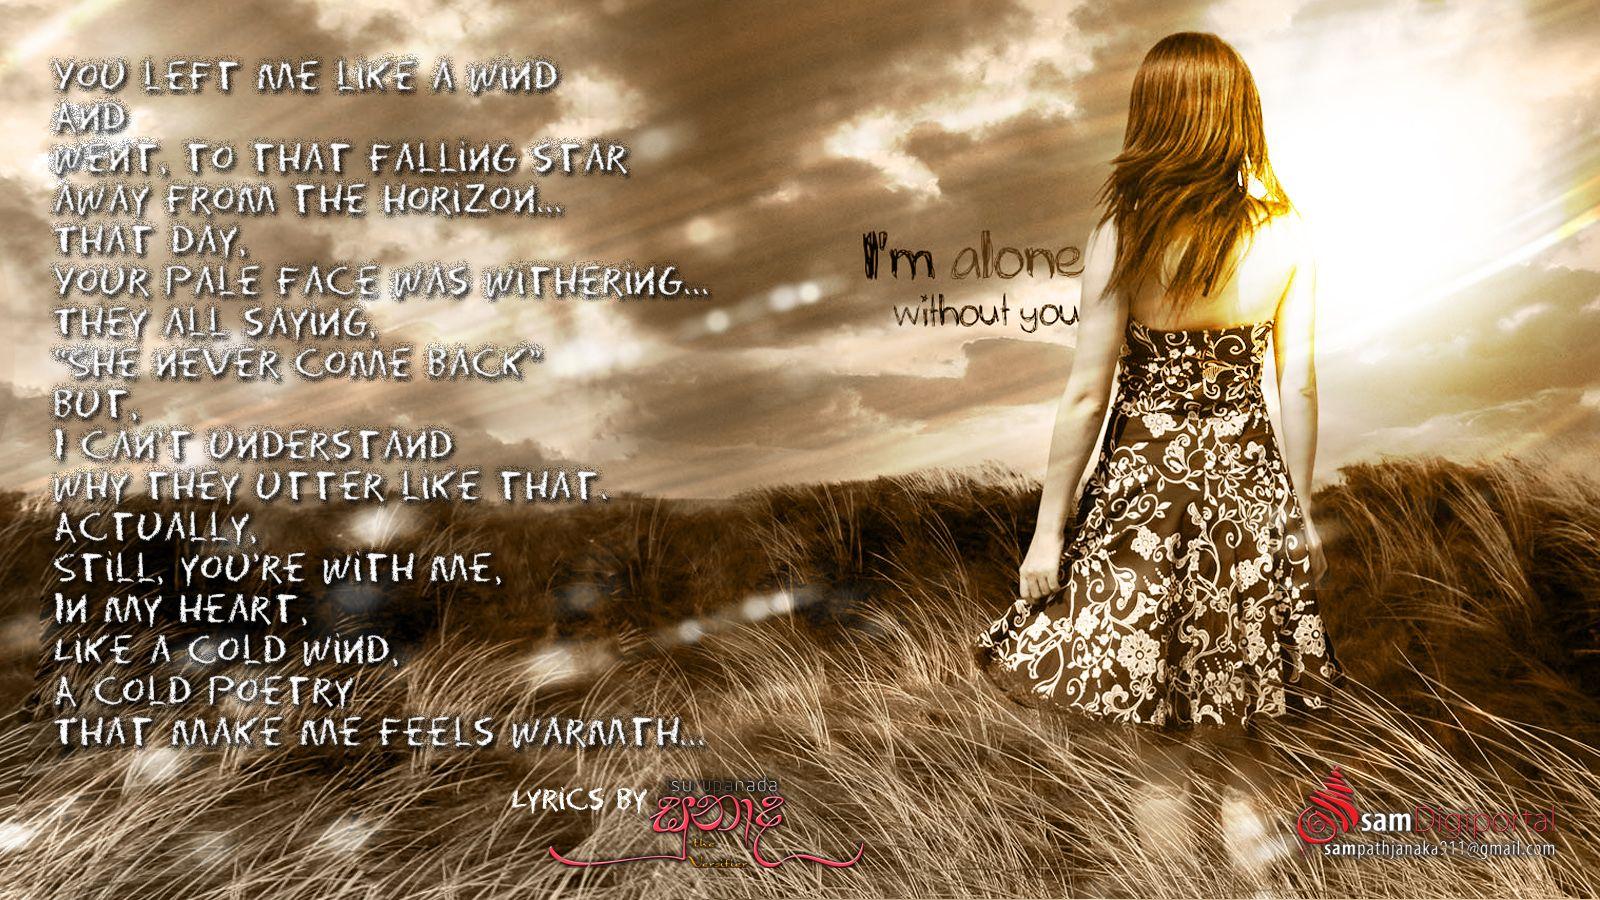 I Am Alone Without You Wallpaper